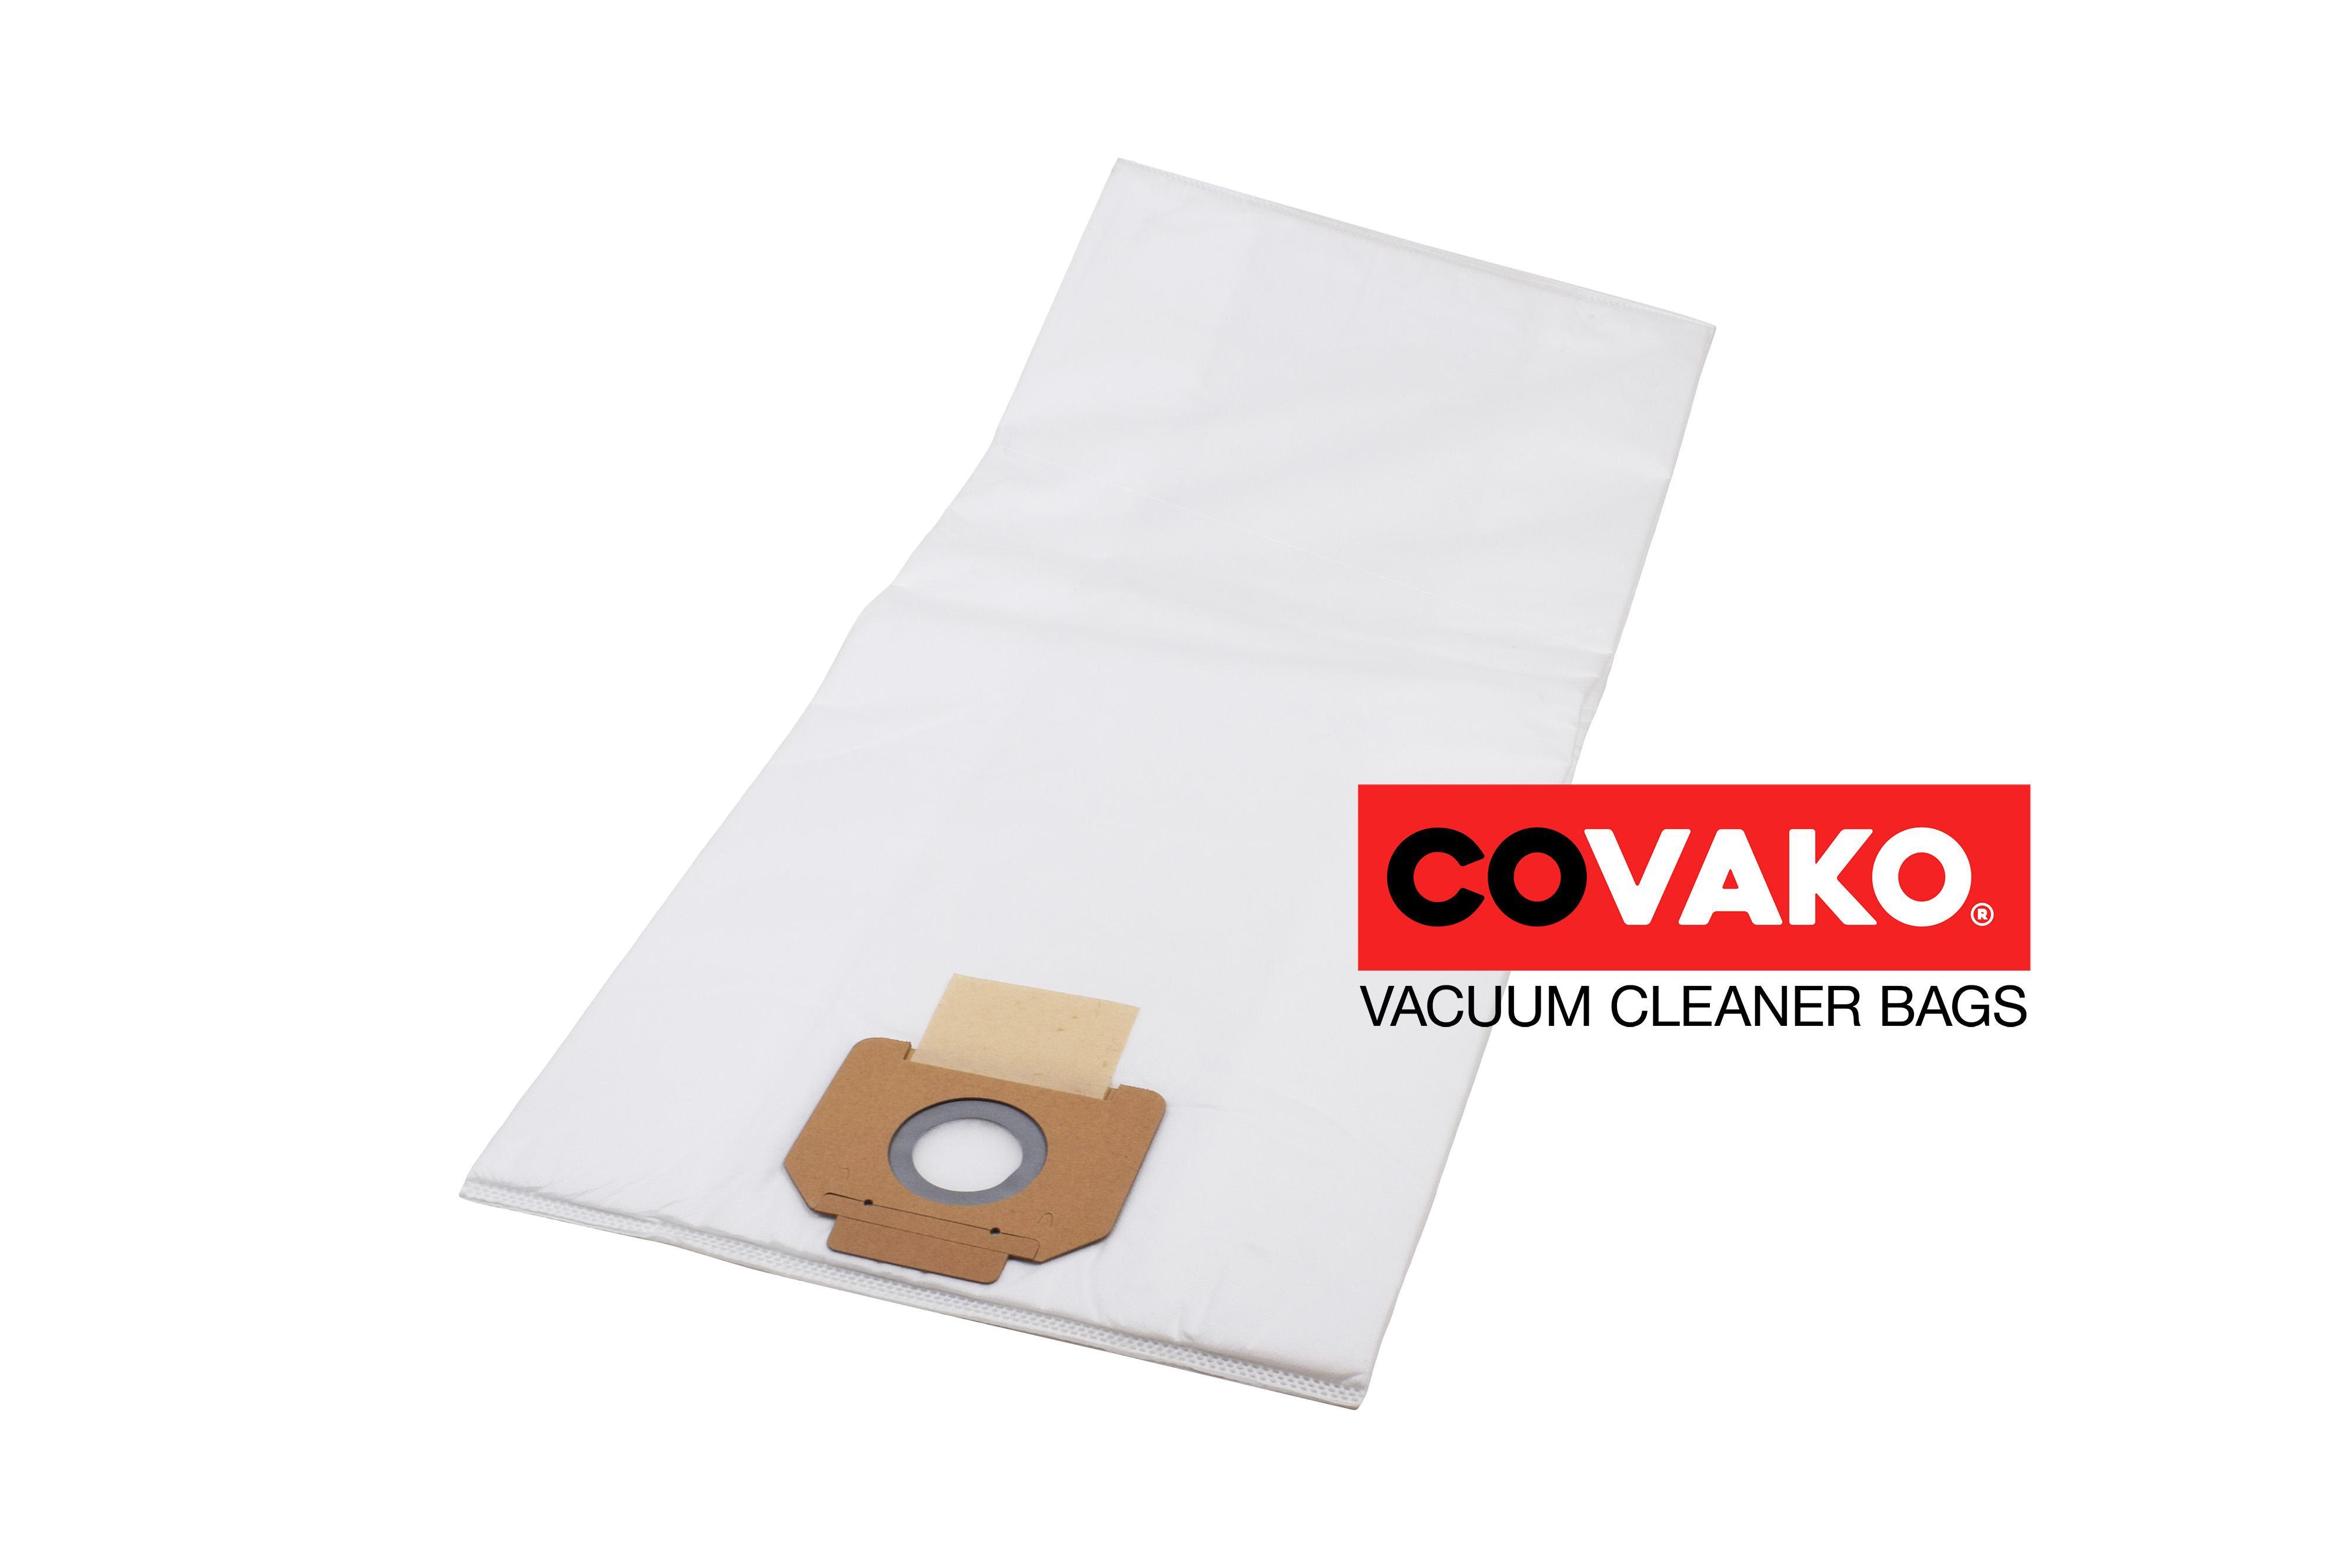 Gansow GC 2/90 W&D / Synthesis - Gansow vacuum cleaner bags